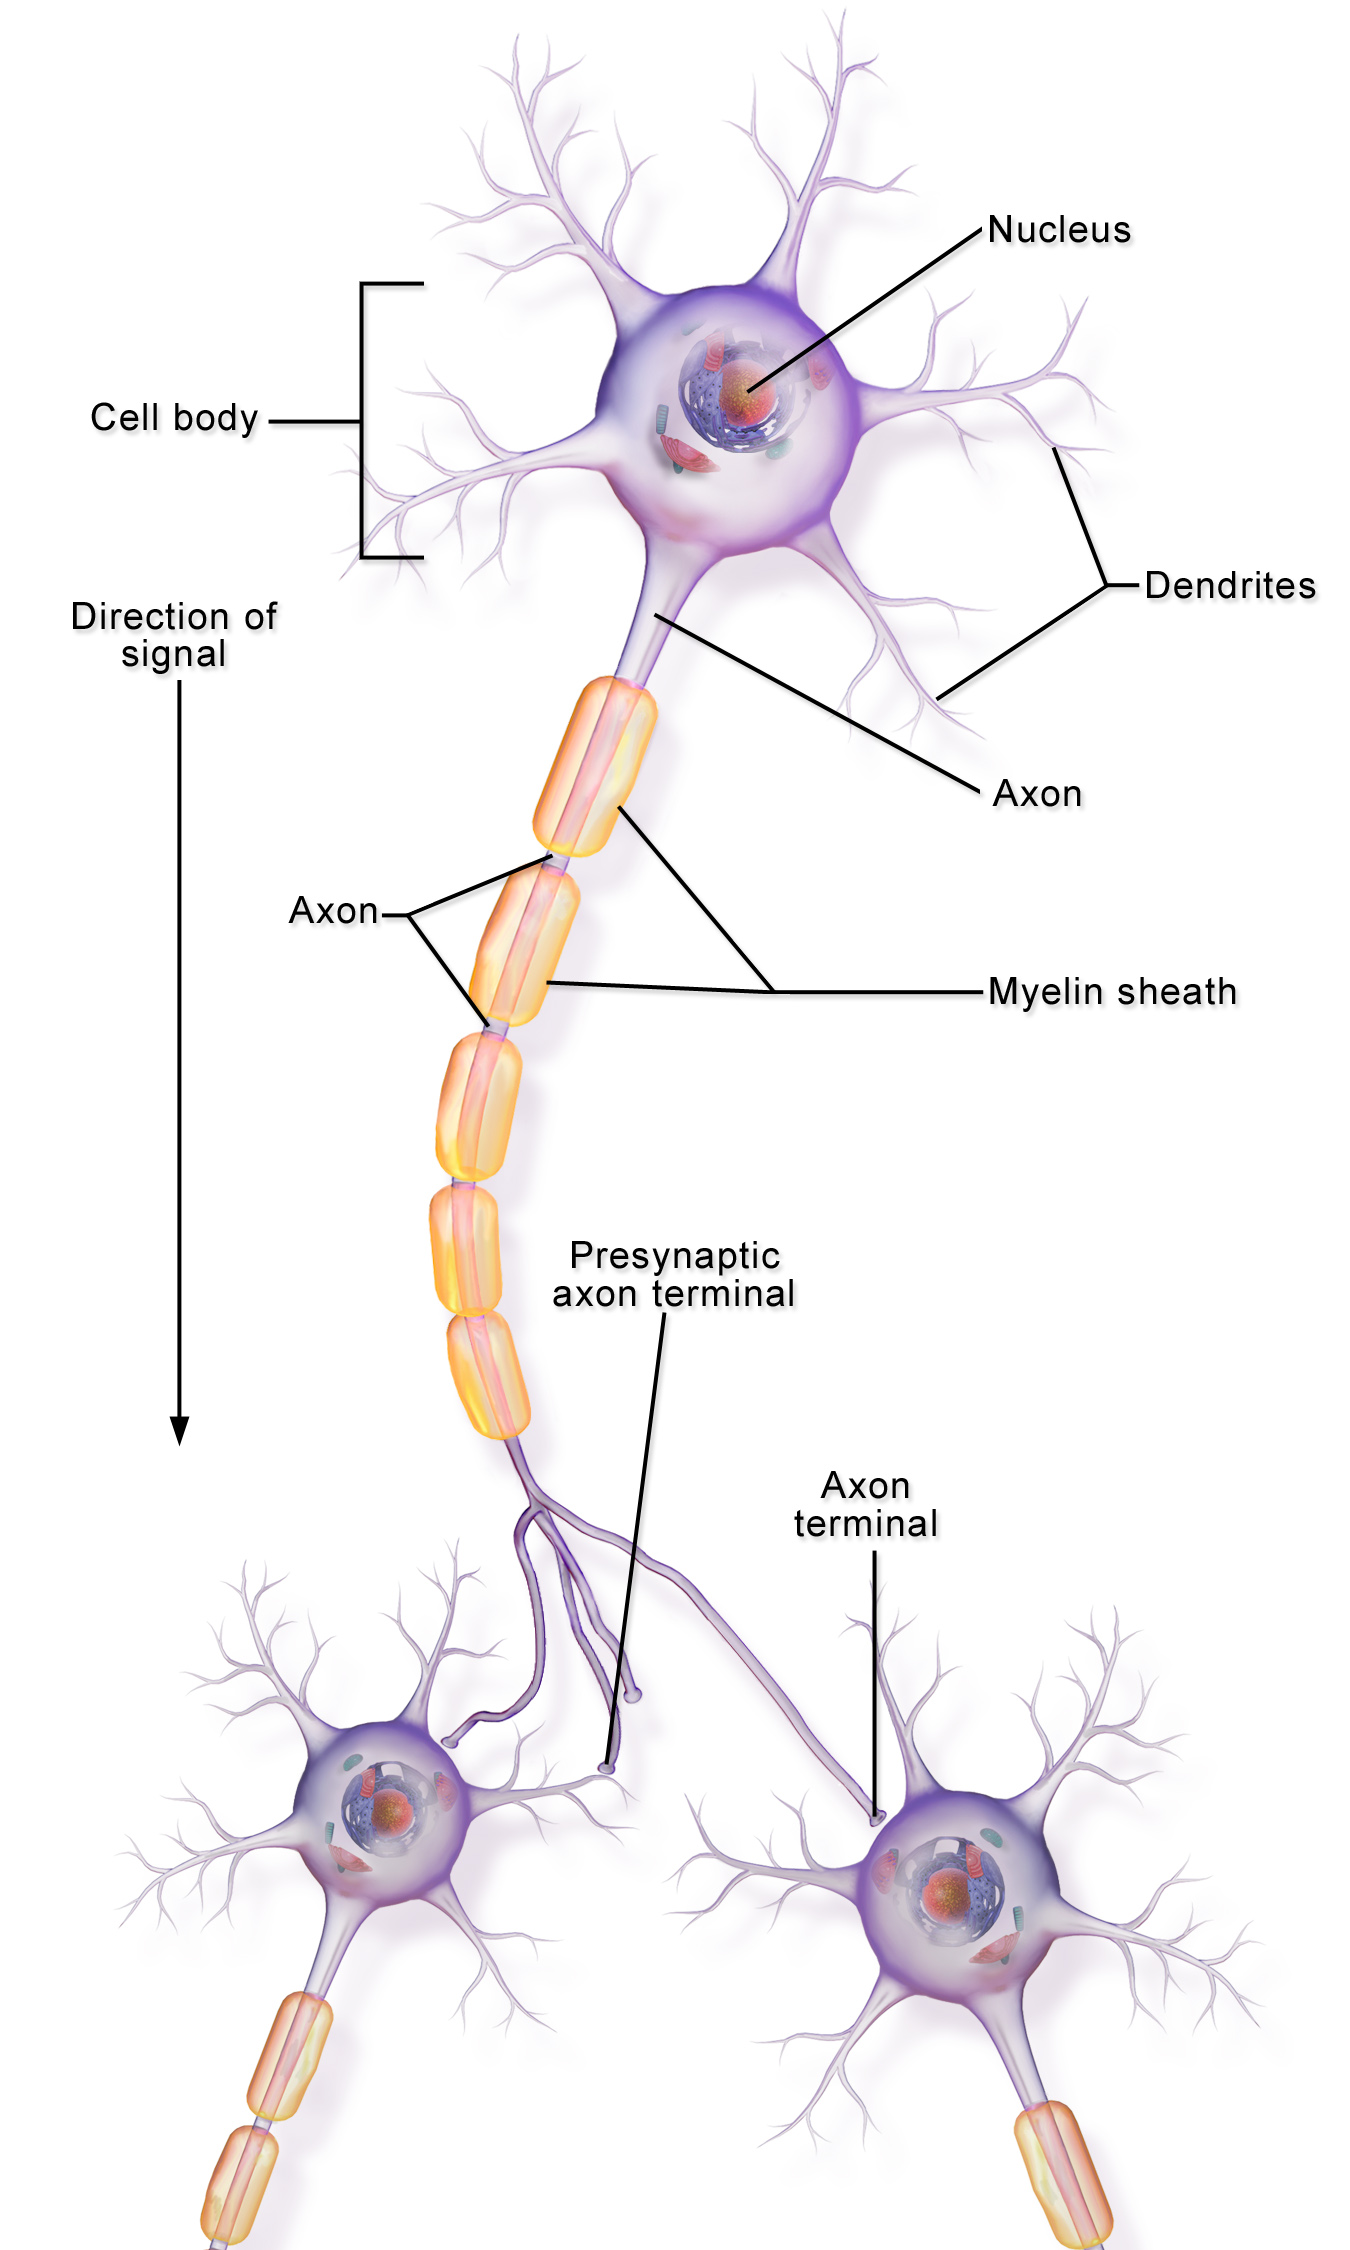 One multipolar neuron with multiple dendrites and one long axon branching to reach 2 other neurons.